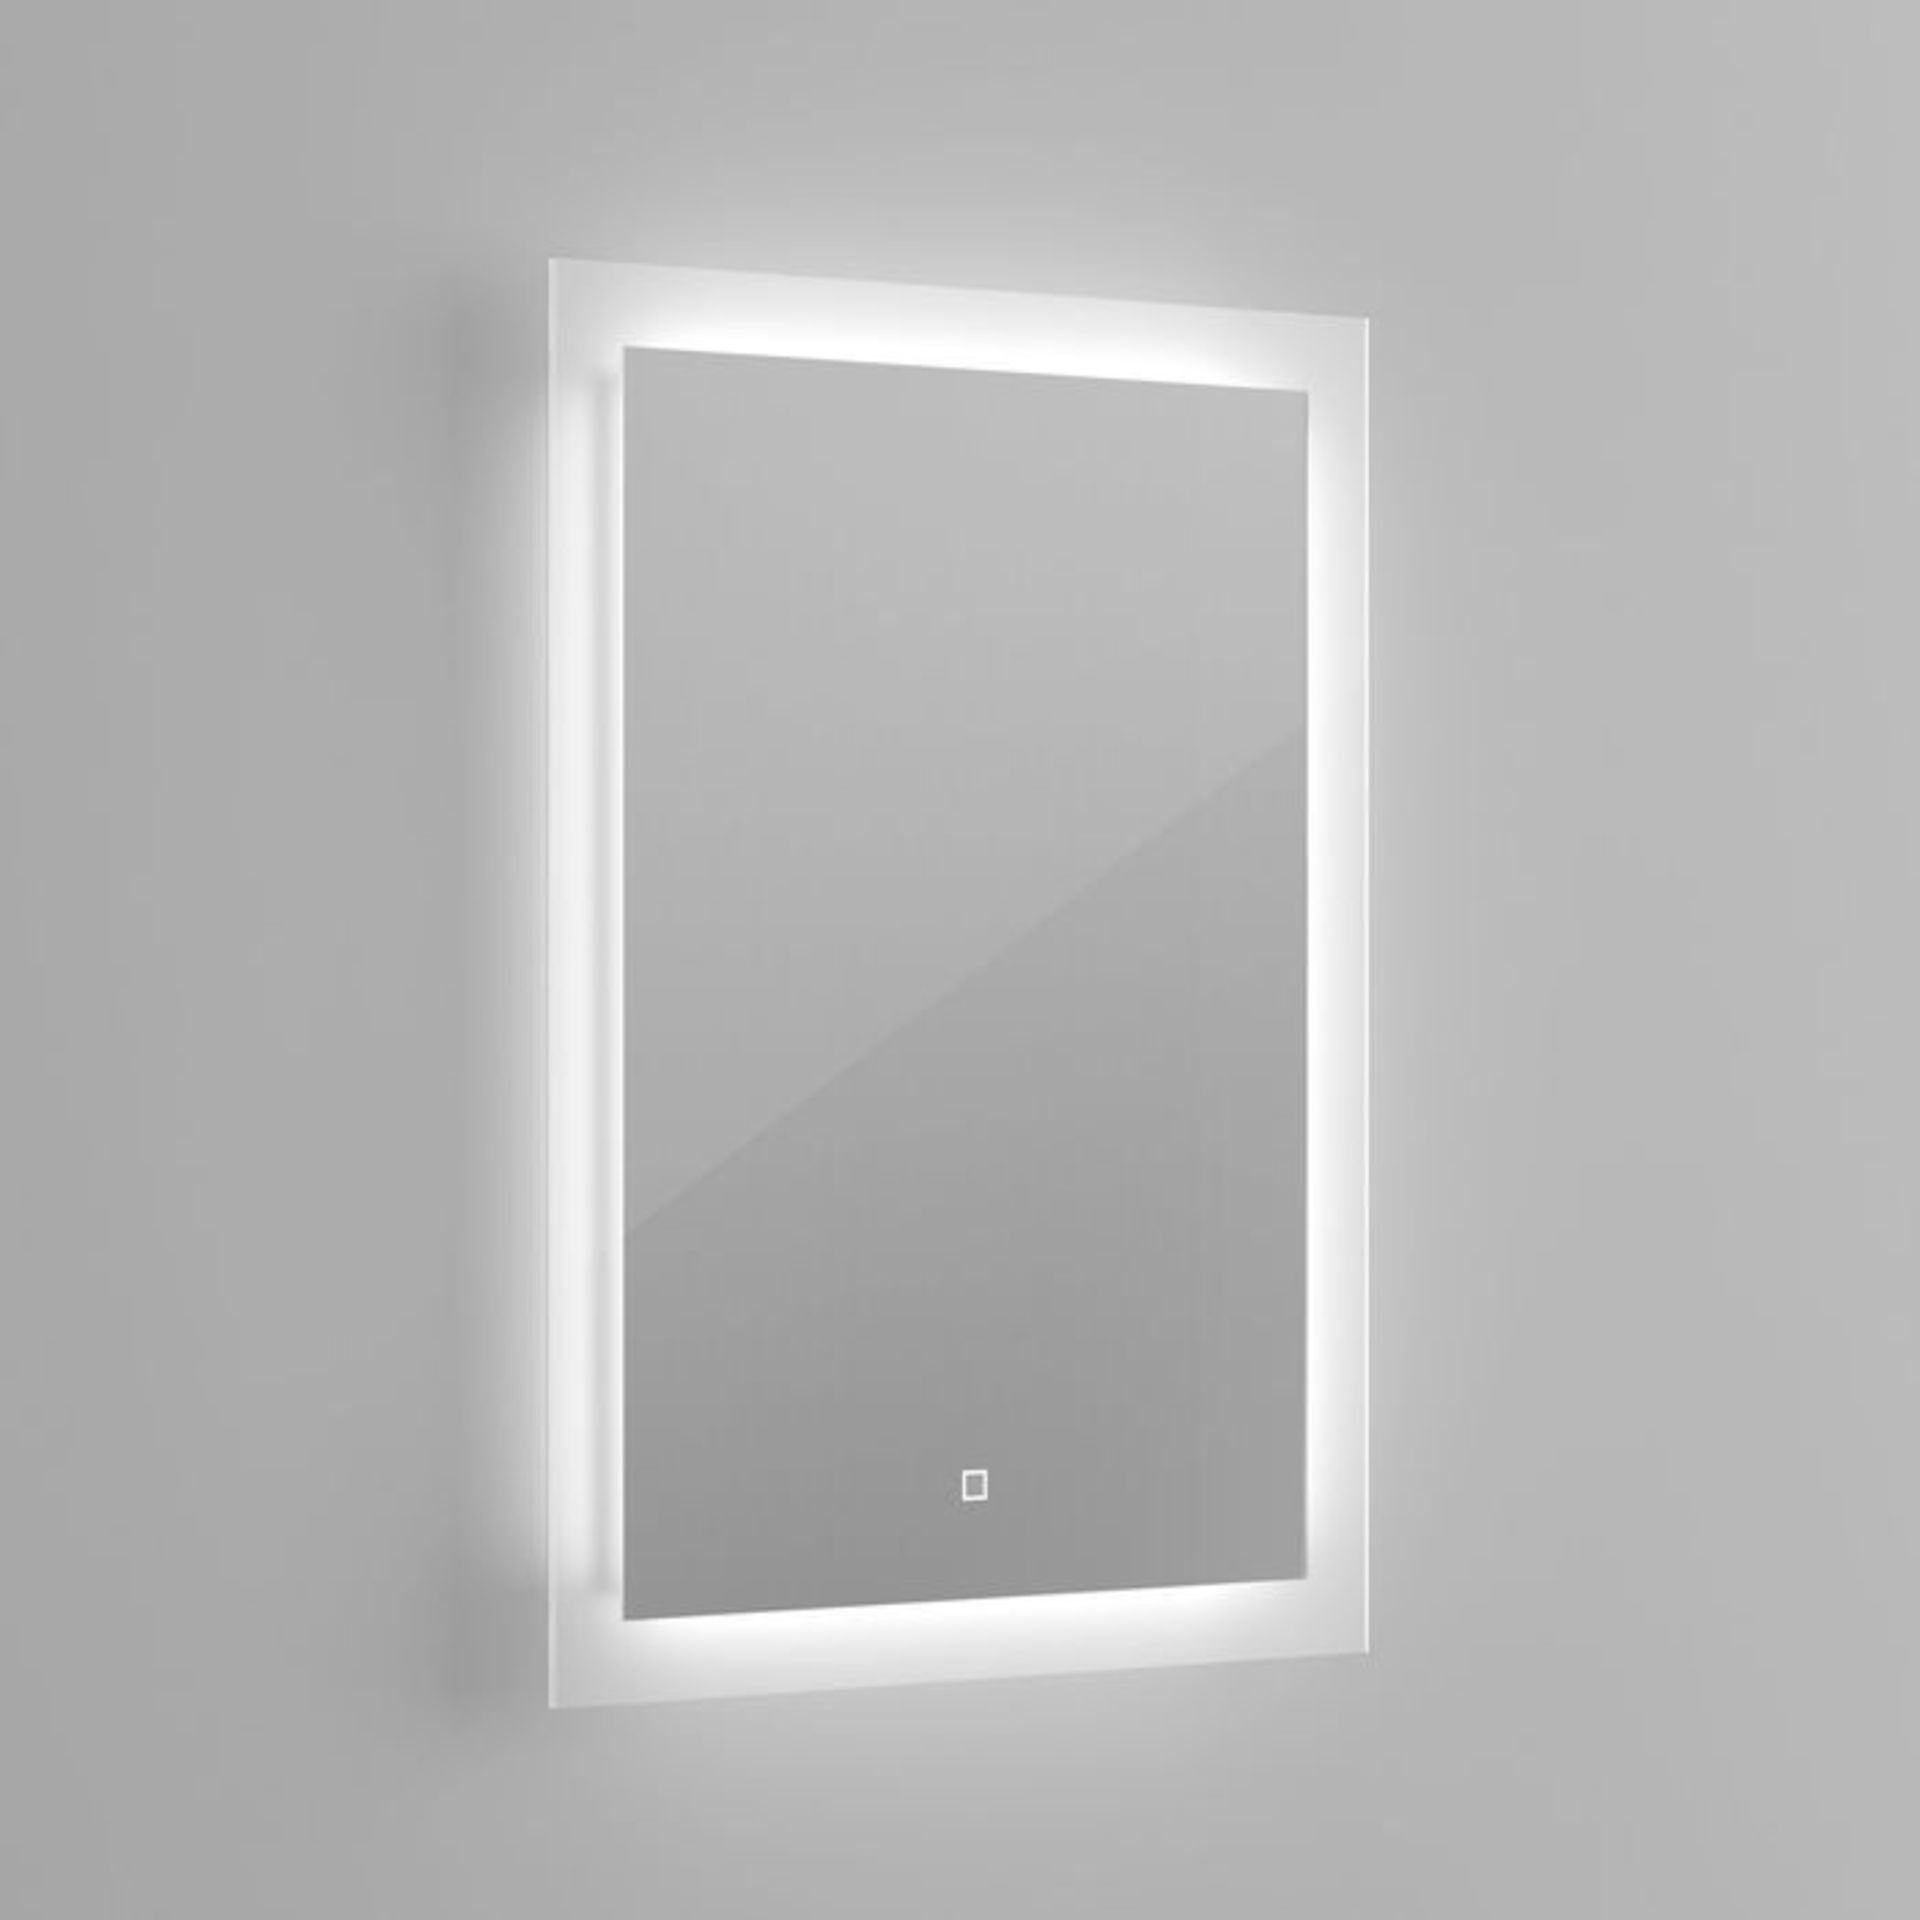 (H16) 700x500mm Orion Illuminated LED Mirror - Switch Control RRP £349.99 Energy efficient LED - Image 6 of 6